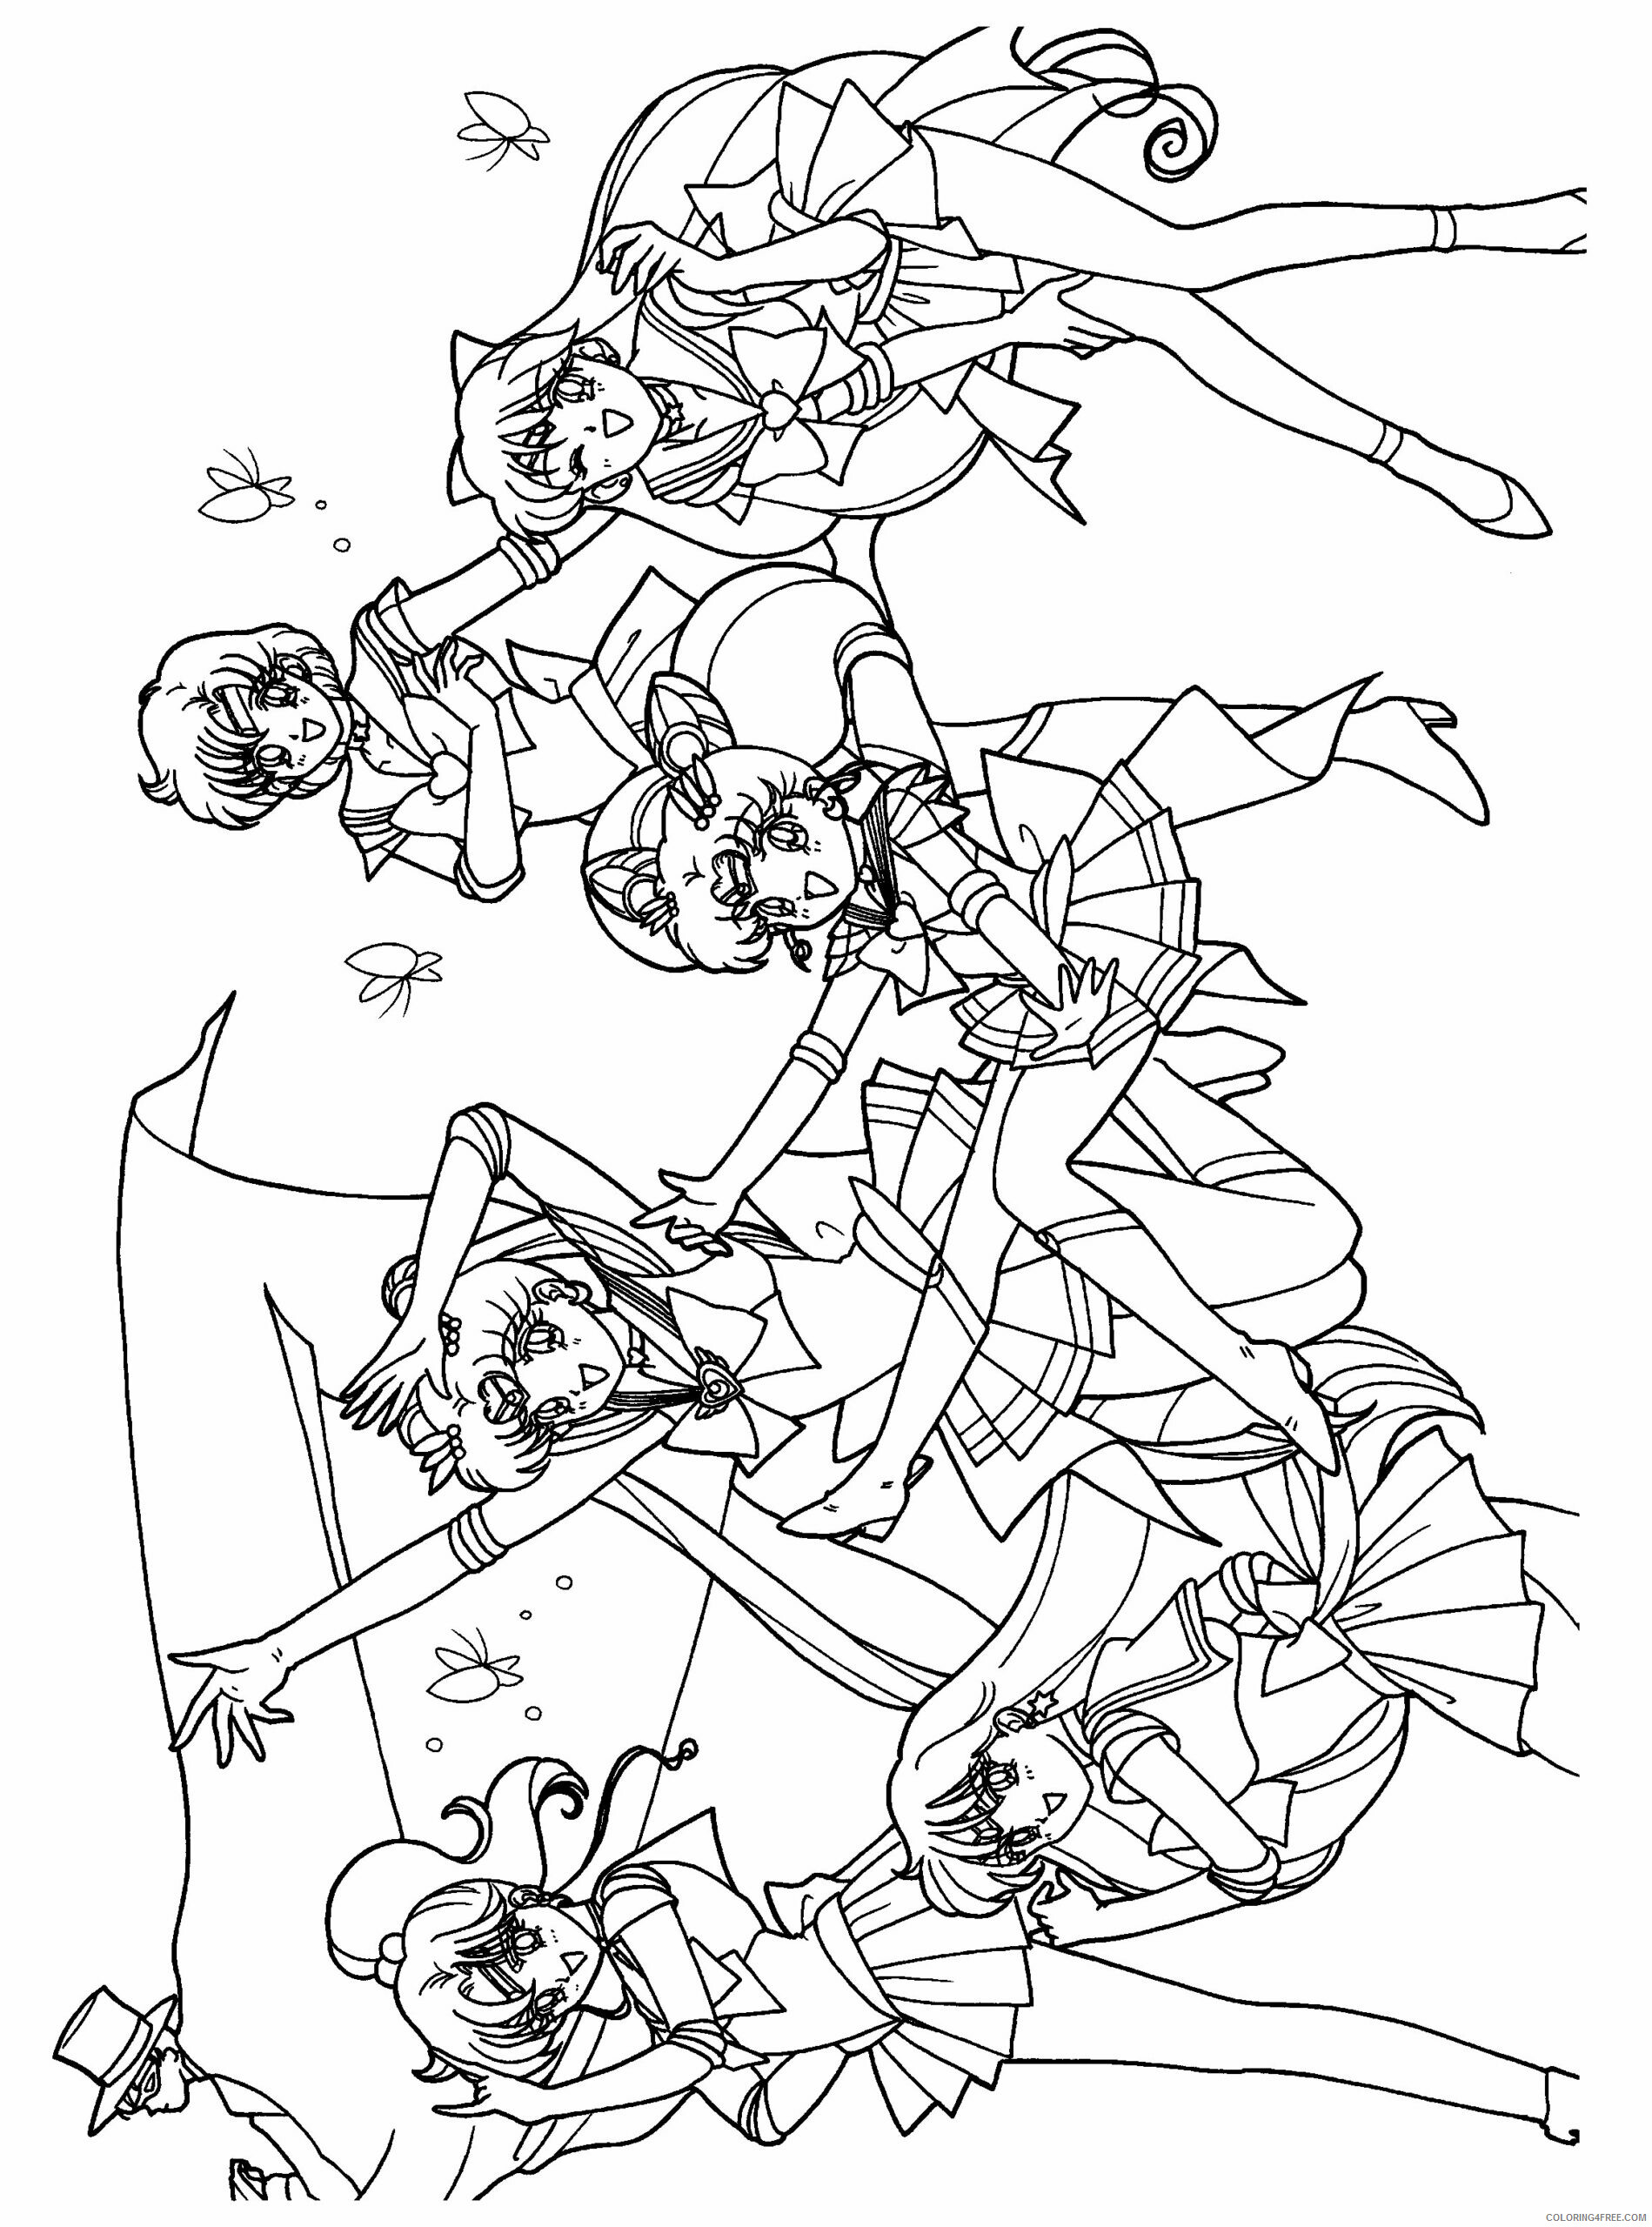 Sailor Moon Printable Coloring Pages Anime sailormoon tQoBp 2 2021 0994 Coloring4free